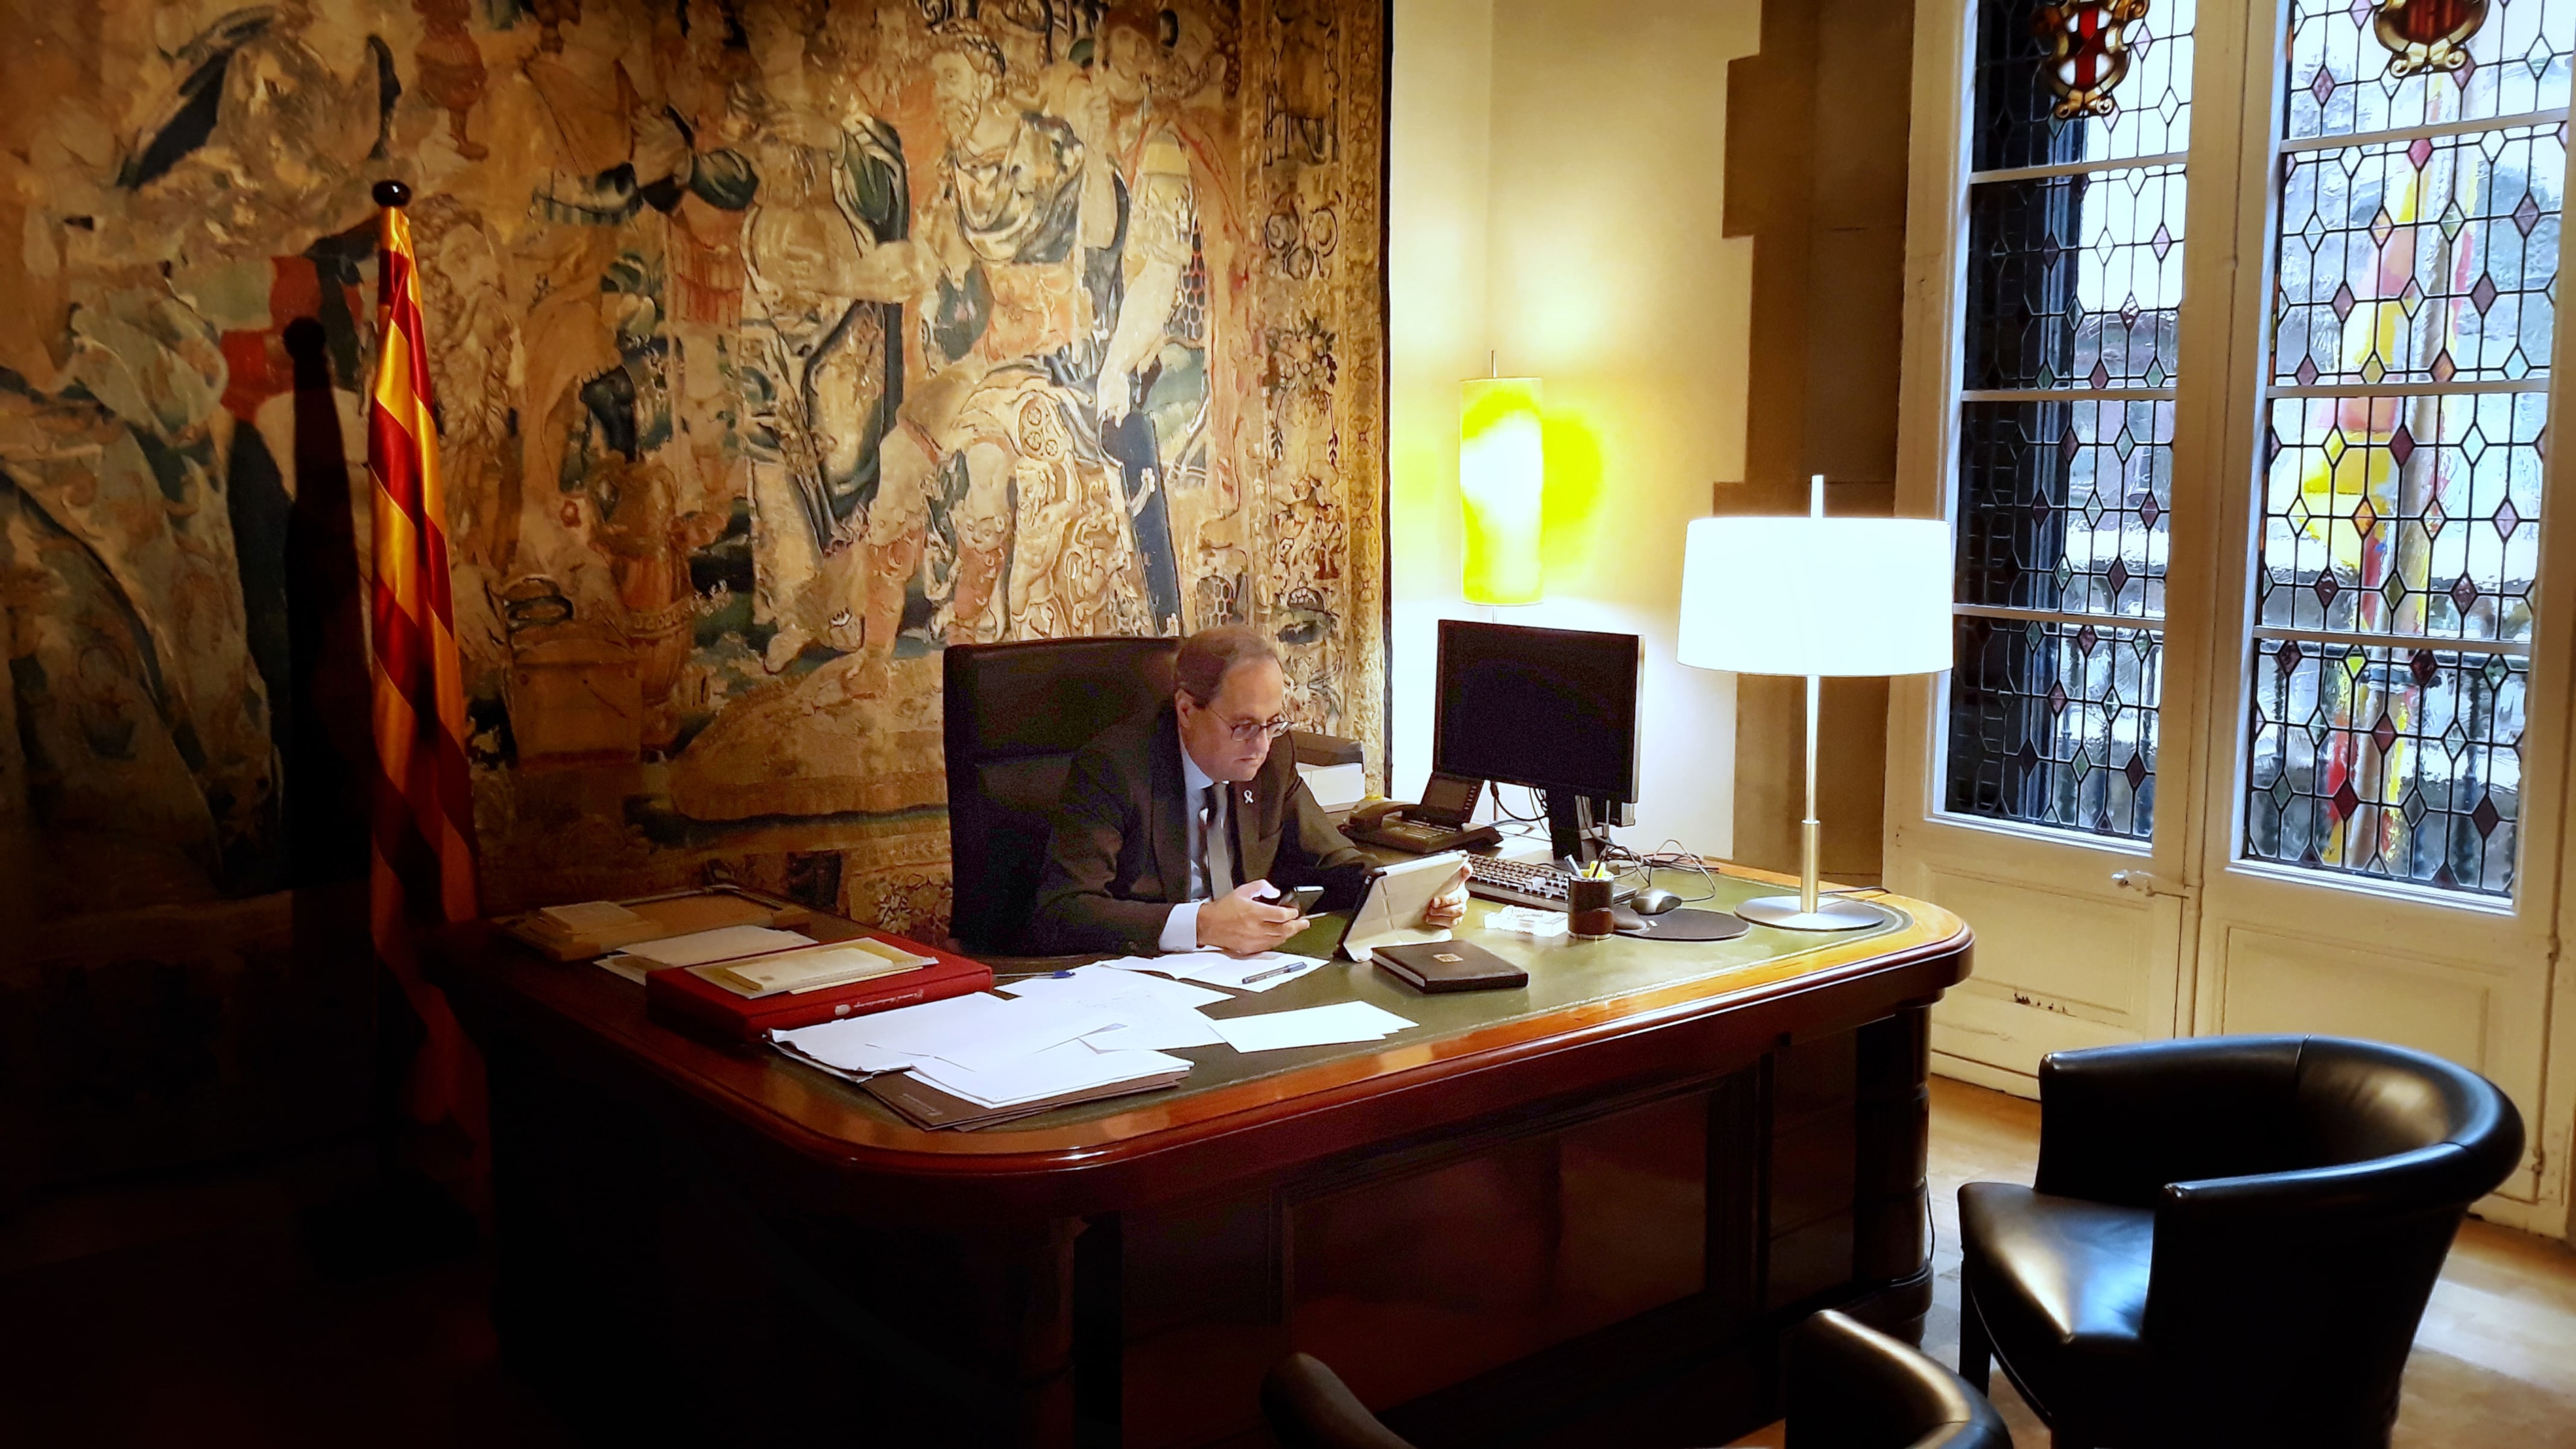 Catalan president Quim Torra working from his official residence following his coronavirus diagnosis